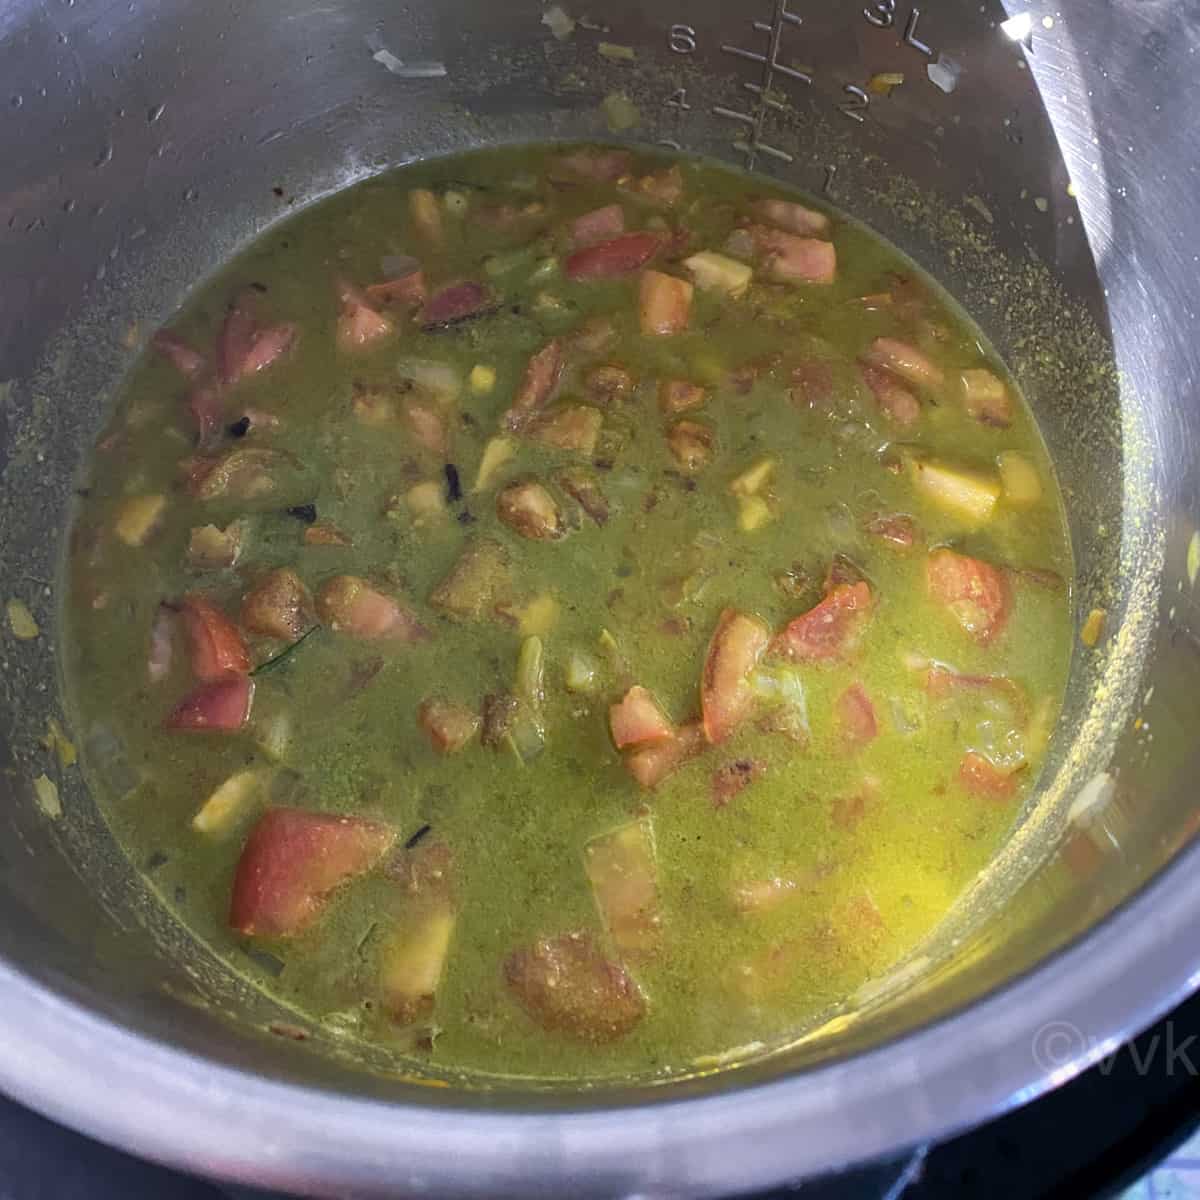 add the water to the tomato green masala mix